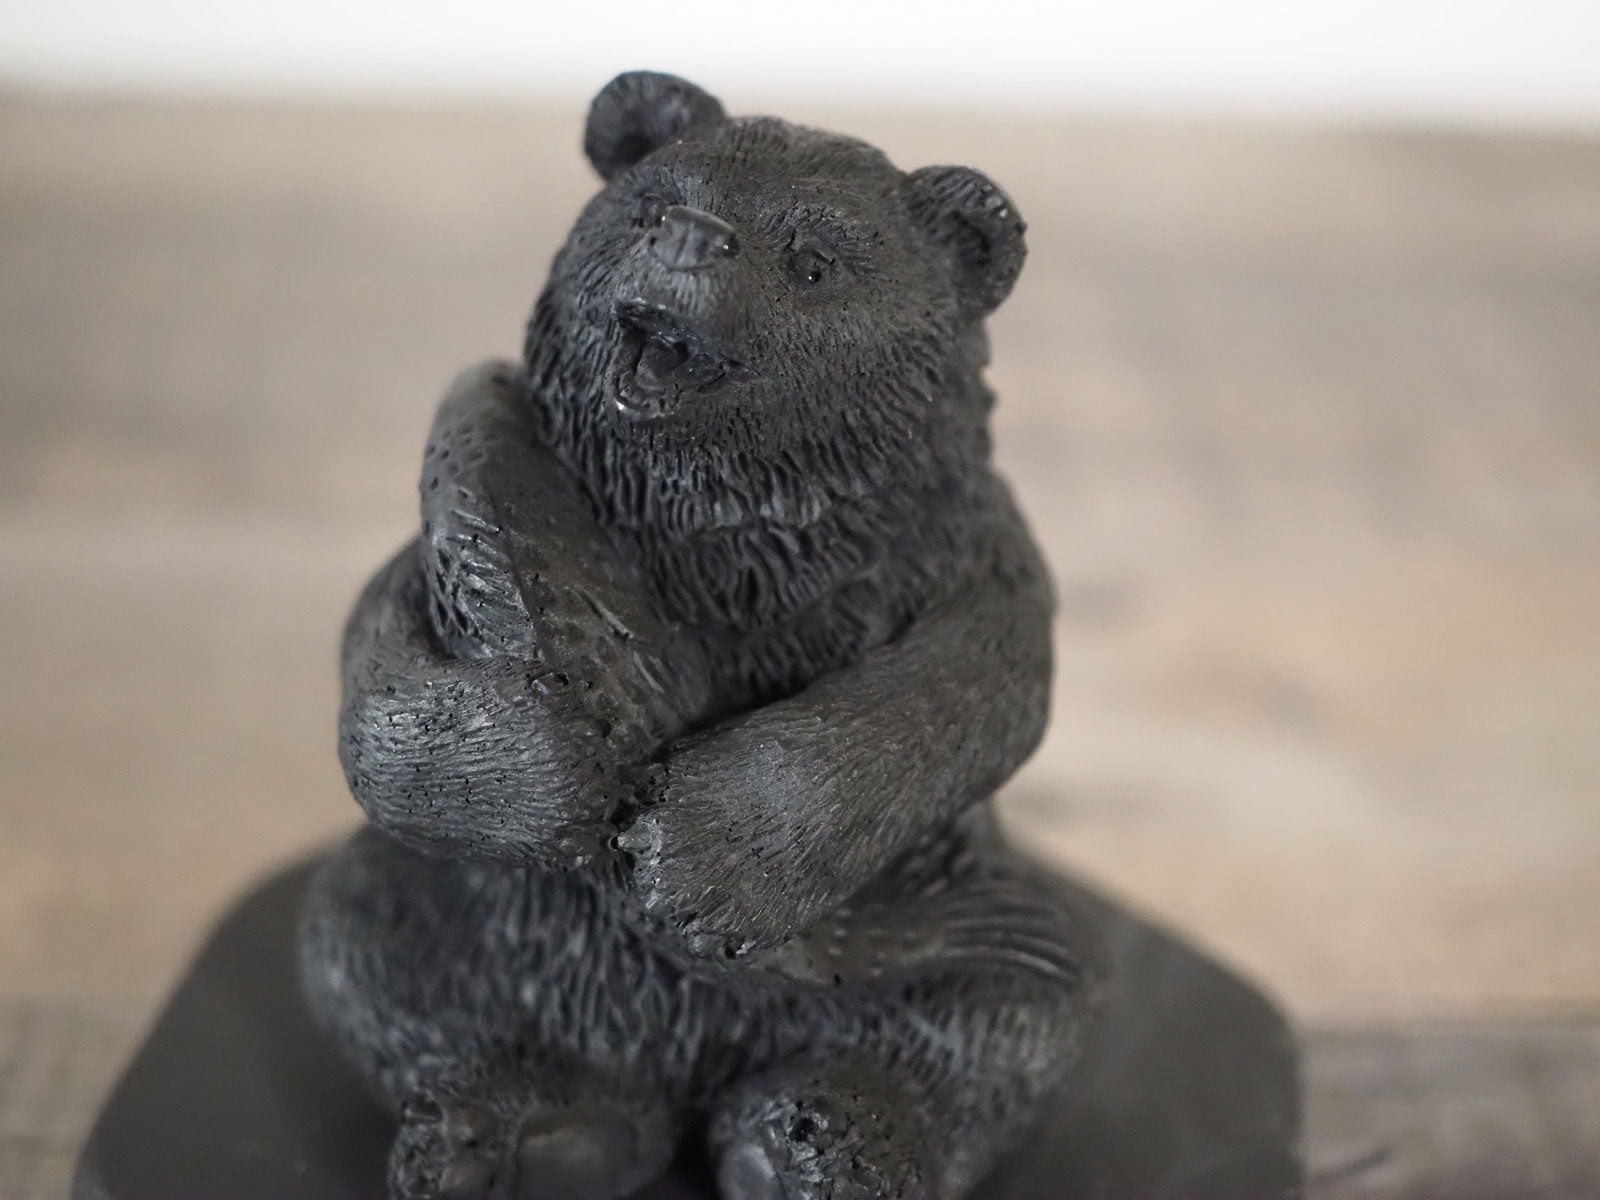 Hand-carved Shungite Bear Carving that is about 4" tall, holding a fish- Closeup